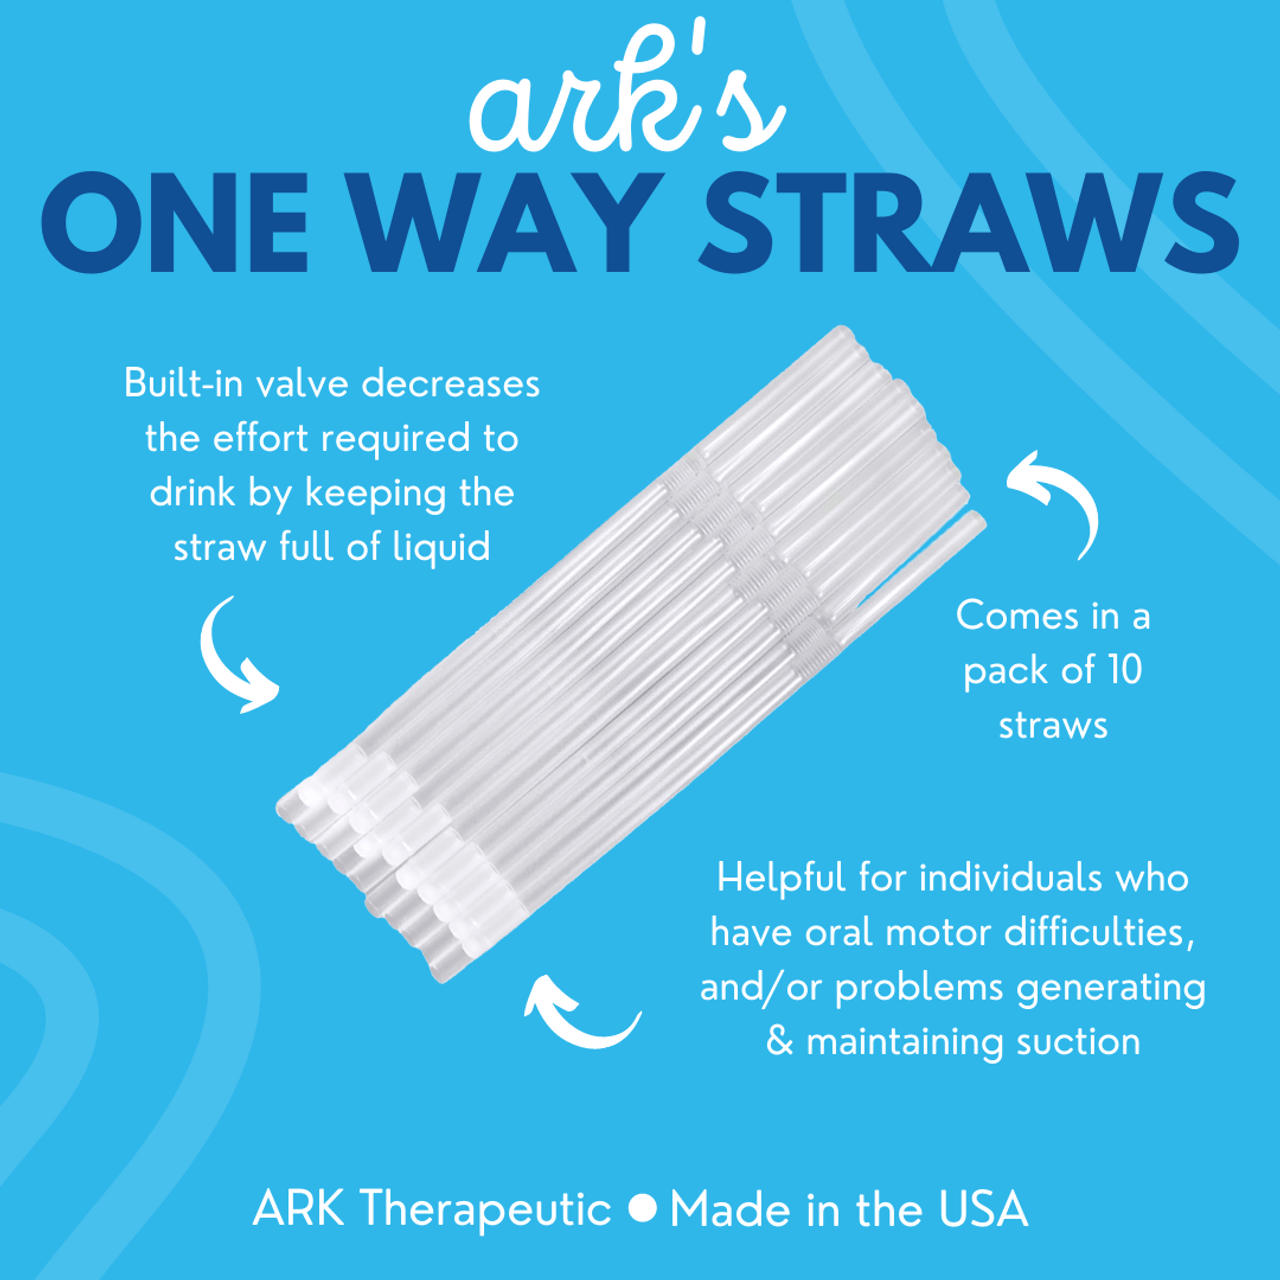 One Way Straw Features